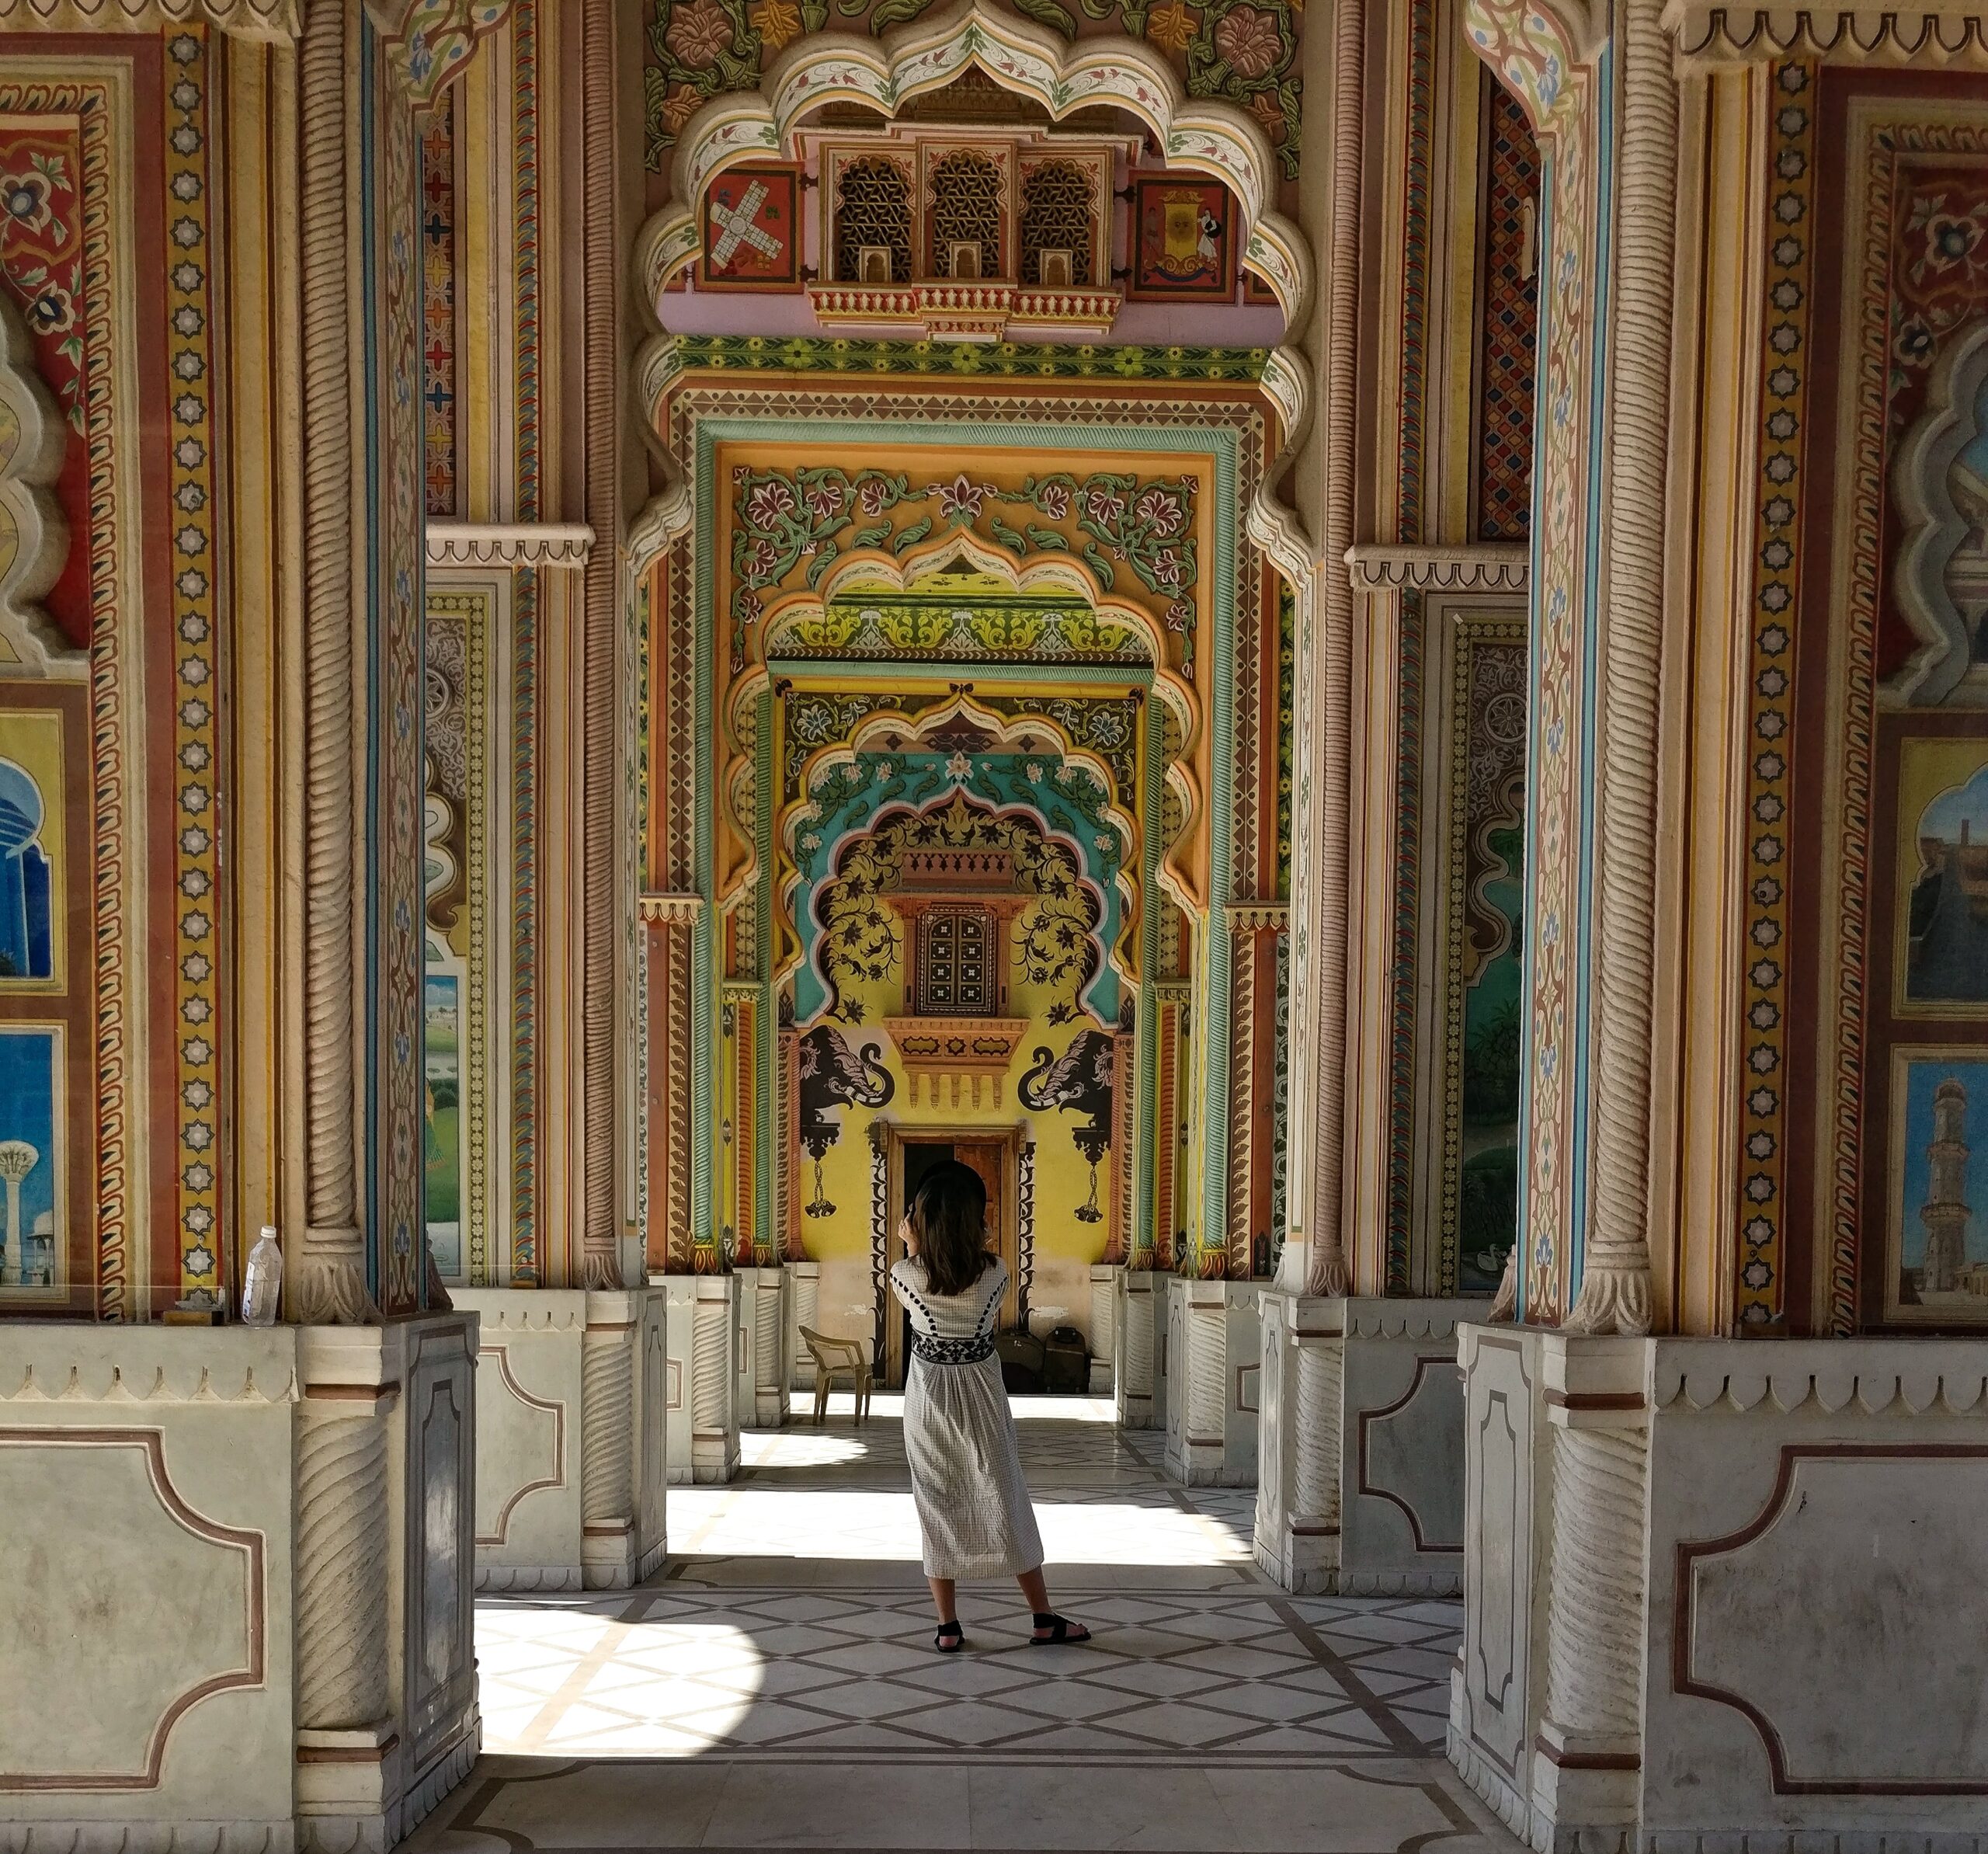 Amazing Reasons to Visit Jaipur on Your Next Vacation